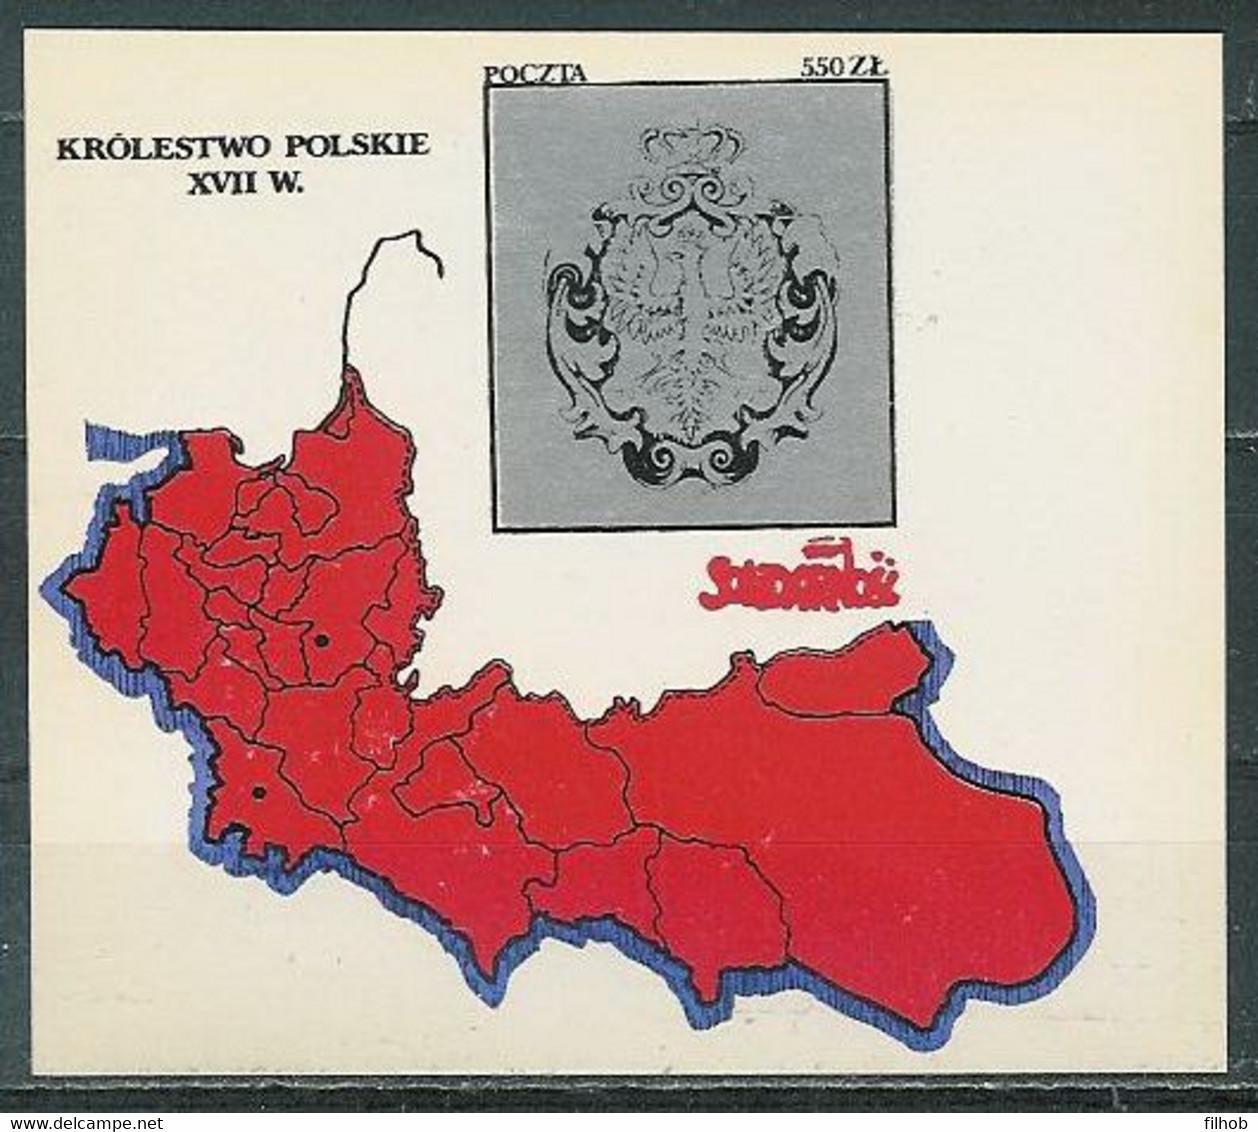 Poland SOLIDARITY (S302): The Kingdom Of Poland In The 17th Century Crest Map - Viñetas Solidarnosc